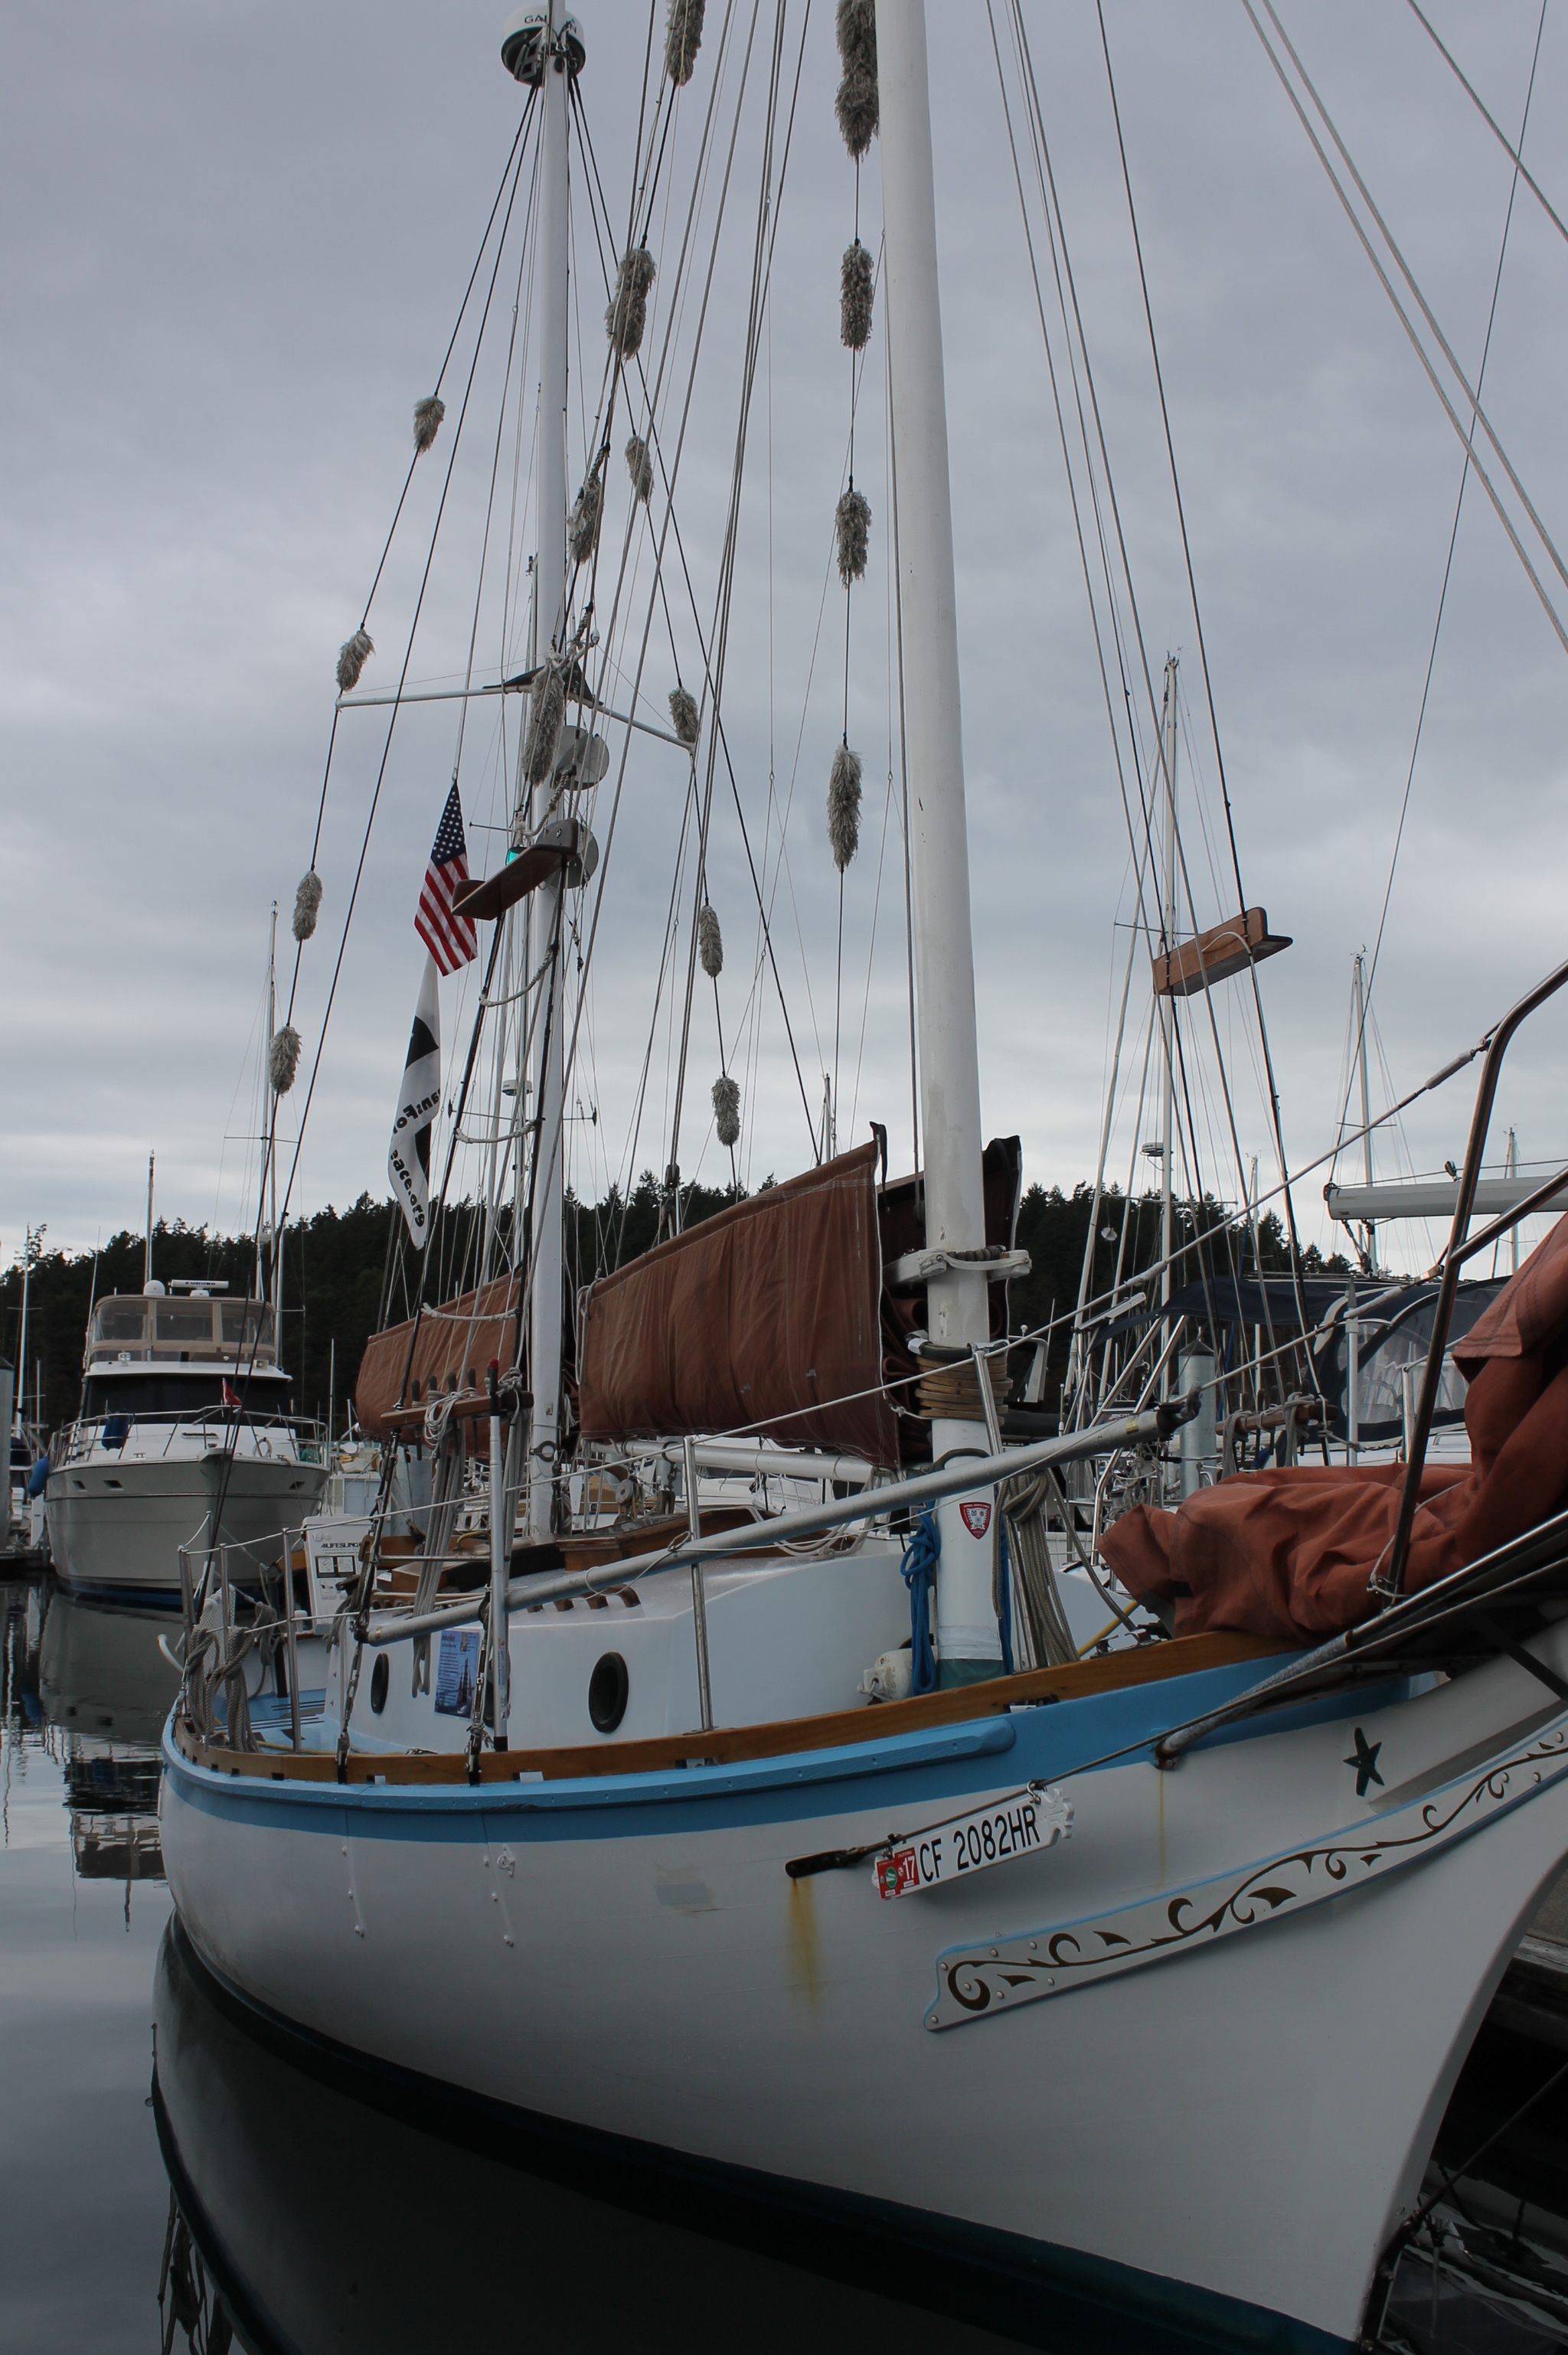 The Golden Rule stops in Friday Harbor